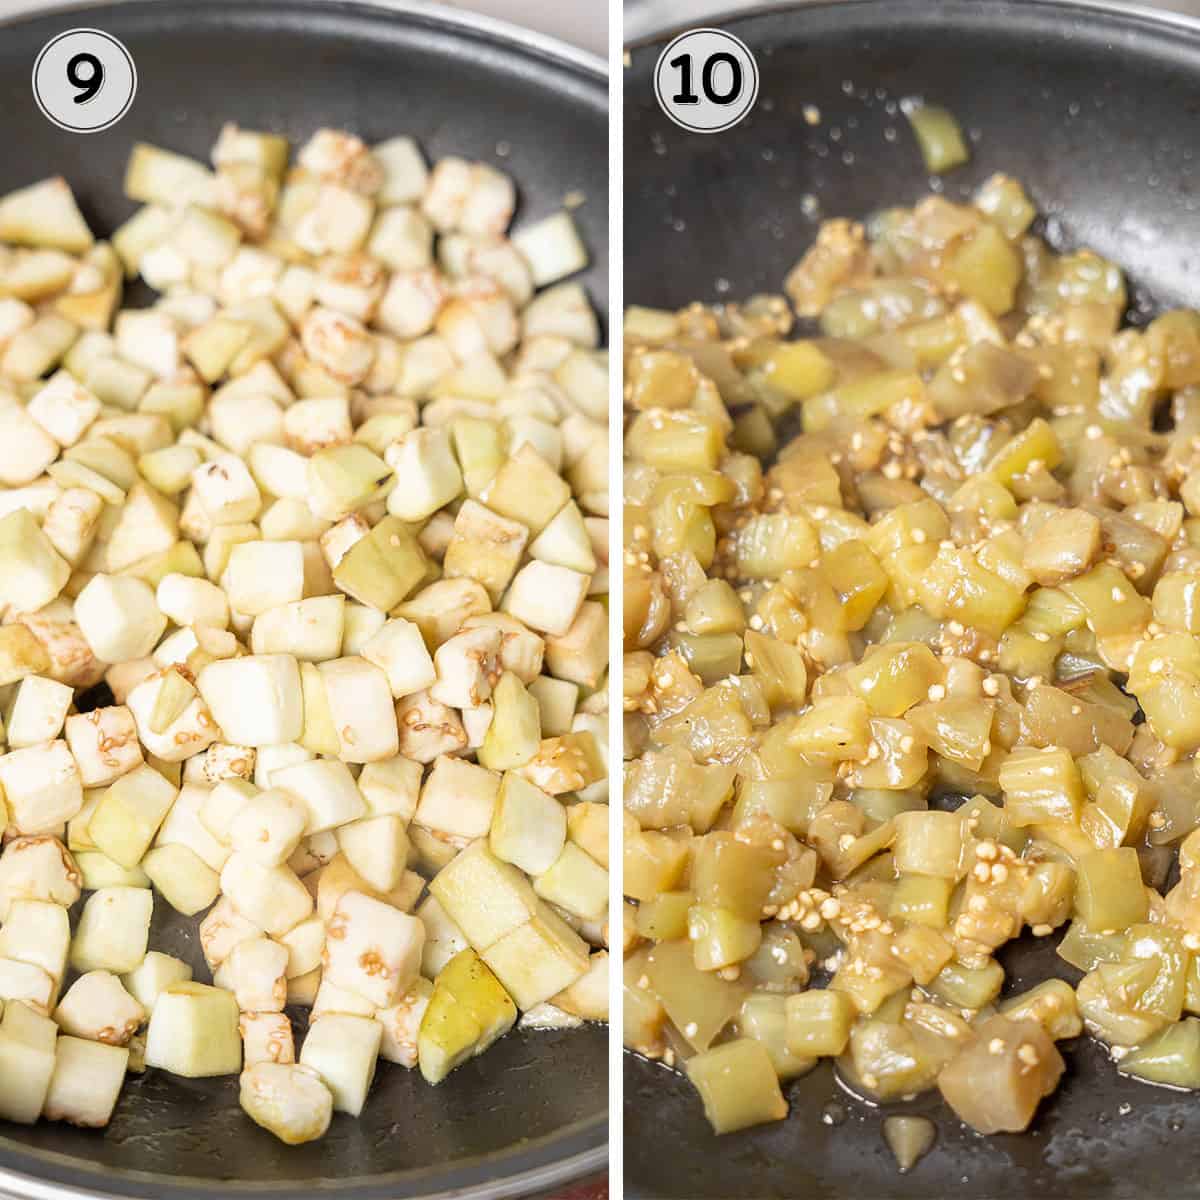 diced eggplant before and after it is cooked in a skillet.